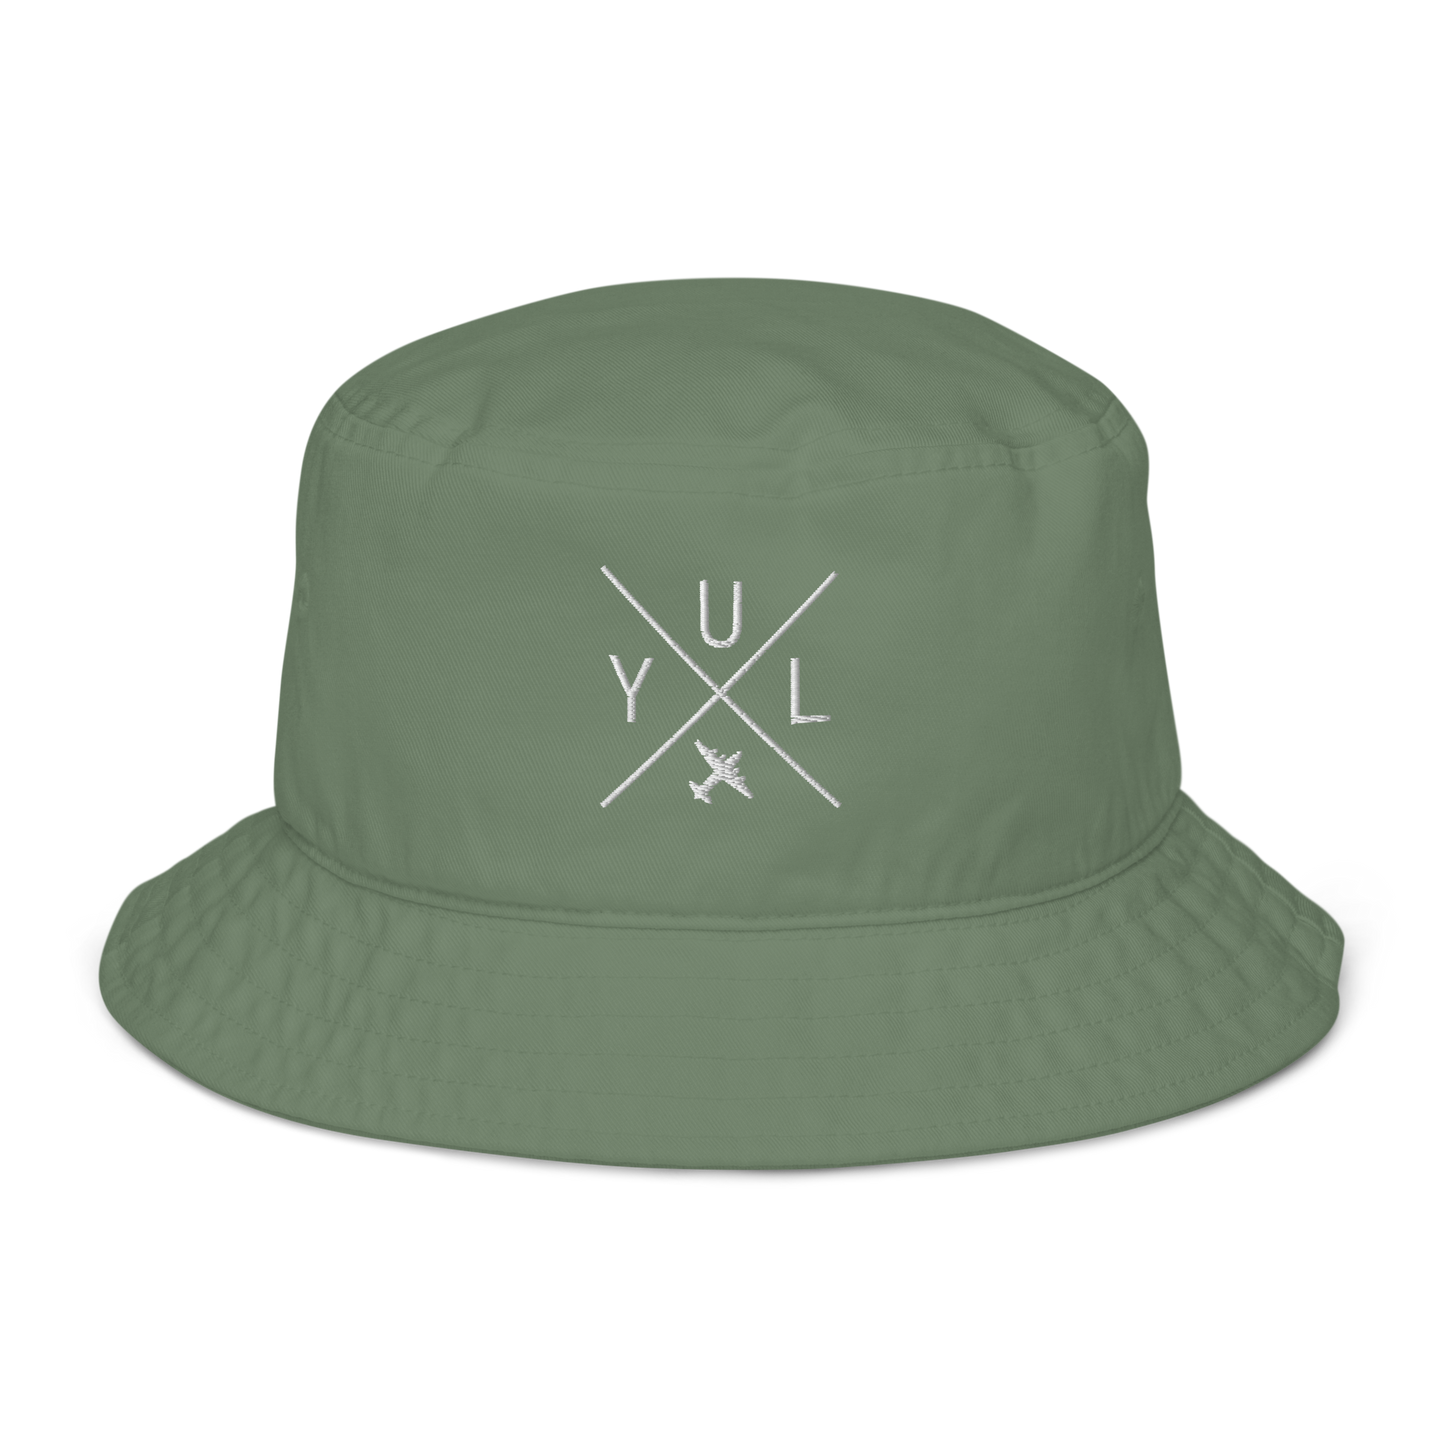 YHM Designs - YUL Montreal Organic Cotton Bucket Hat - Crossed-X Design with Airport Code and Vintage Propliner - White Embroidery - Image 06